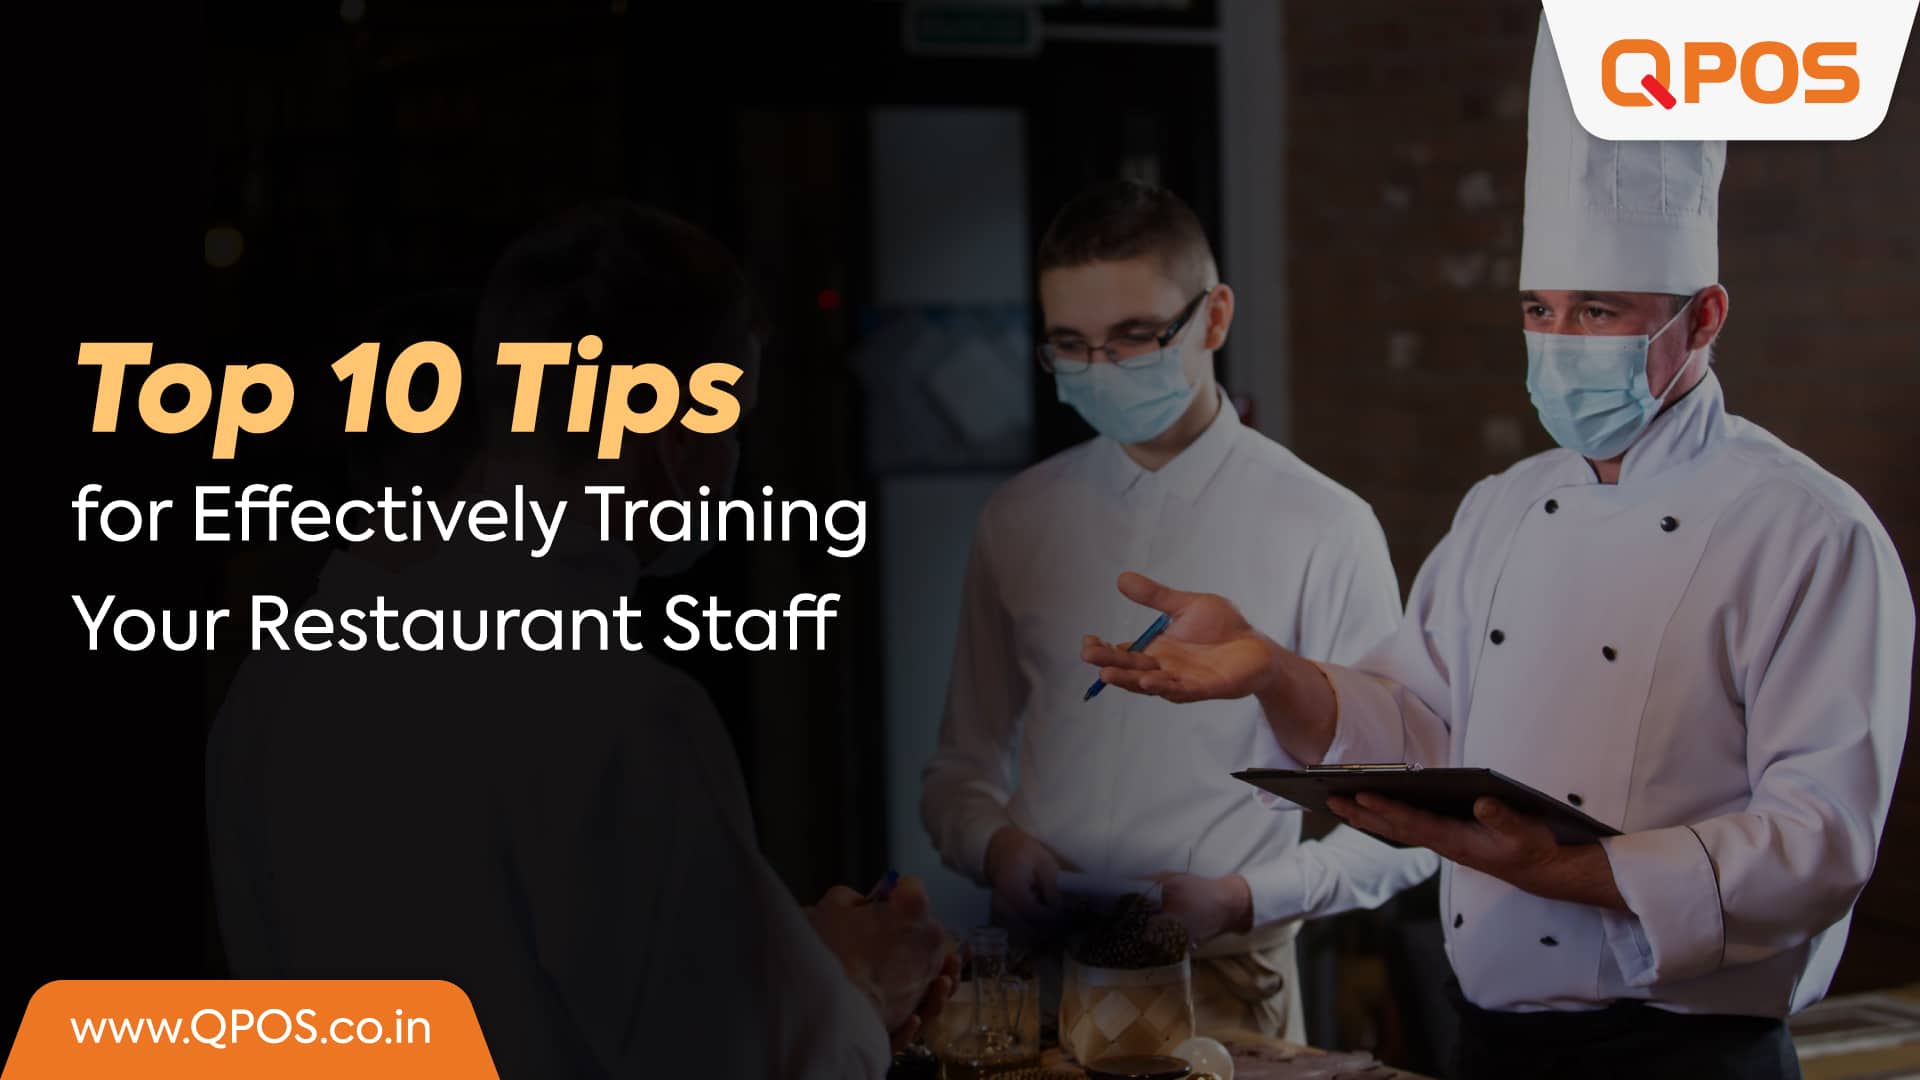 How To Hire the Right Staff for Your Restaurant